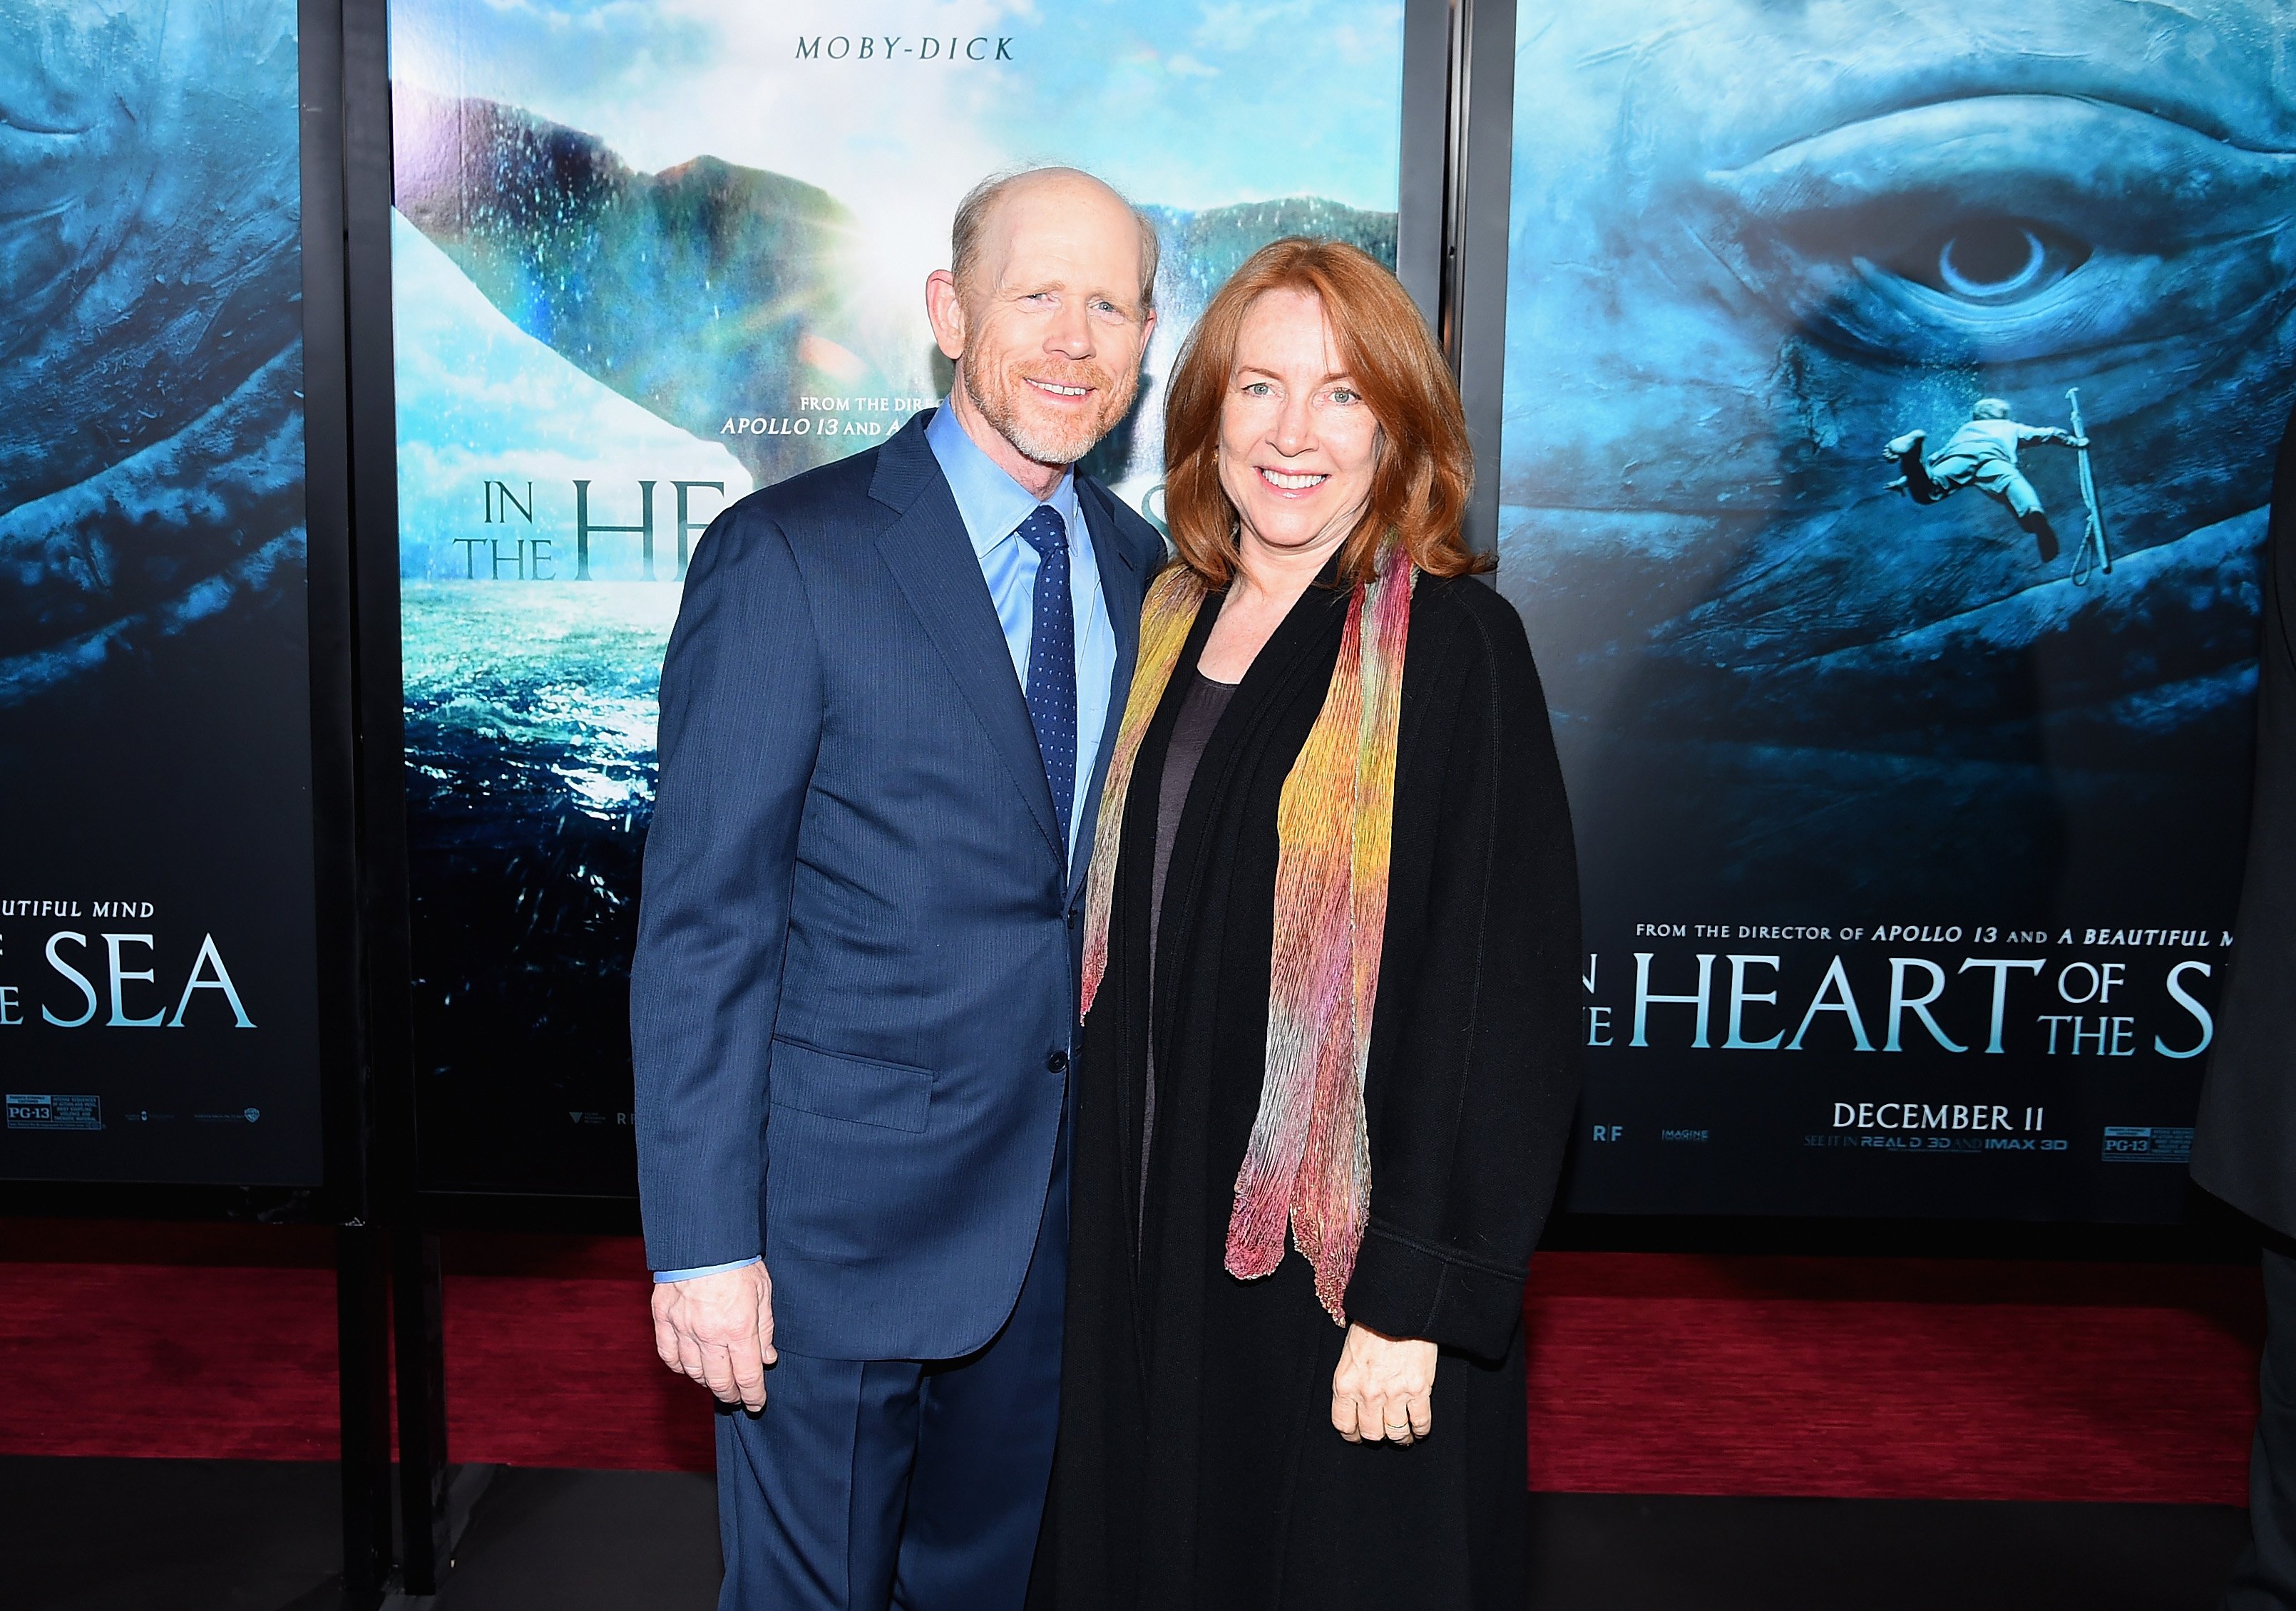 Ron Howard and Cheryl Howard attend "In The Heart Of The Sea" Premiere at Frederick P. Rose Hall, Jazz at Lincoln Center on December 7, 2015, in New York City. | Source: Getty Images